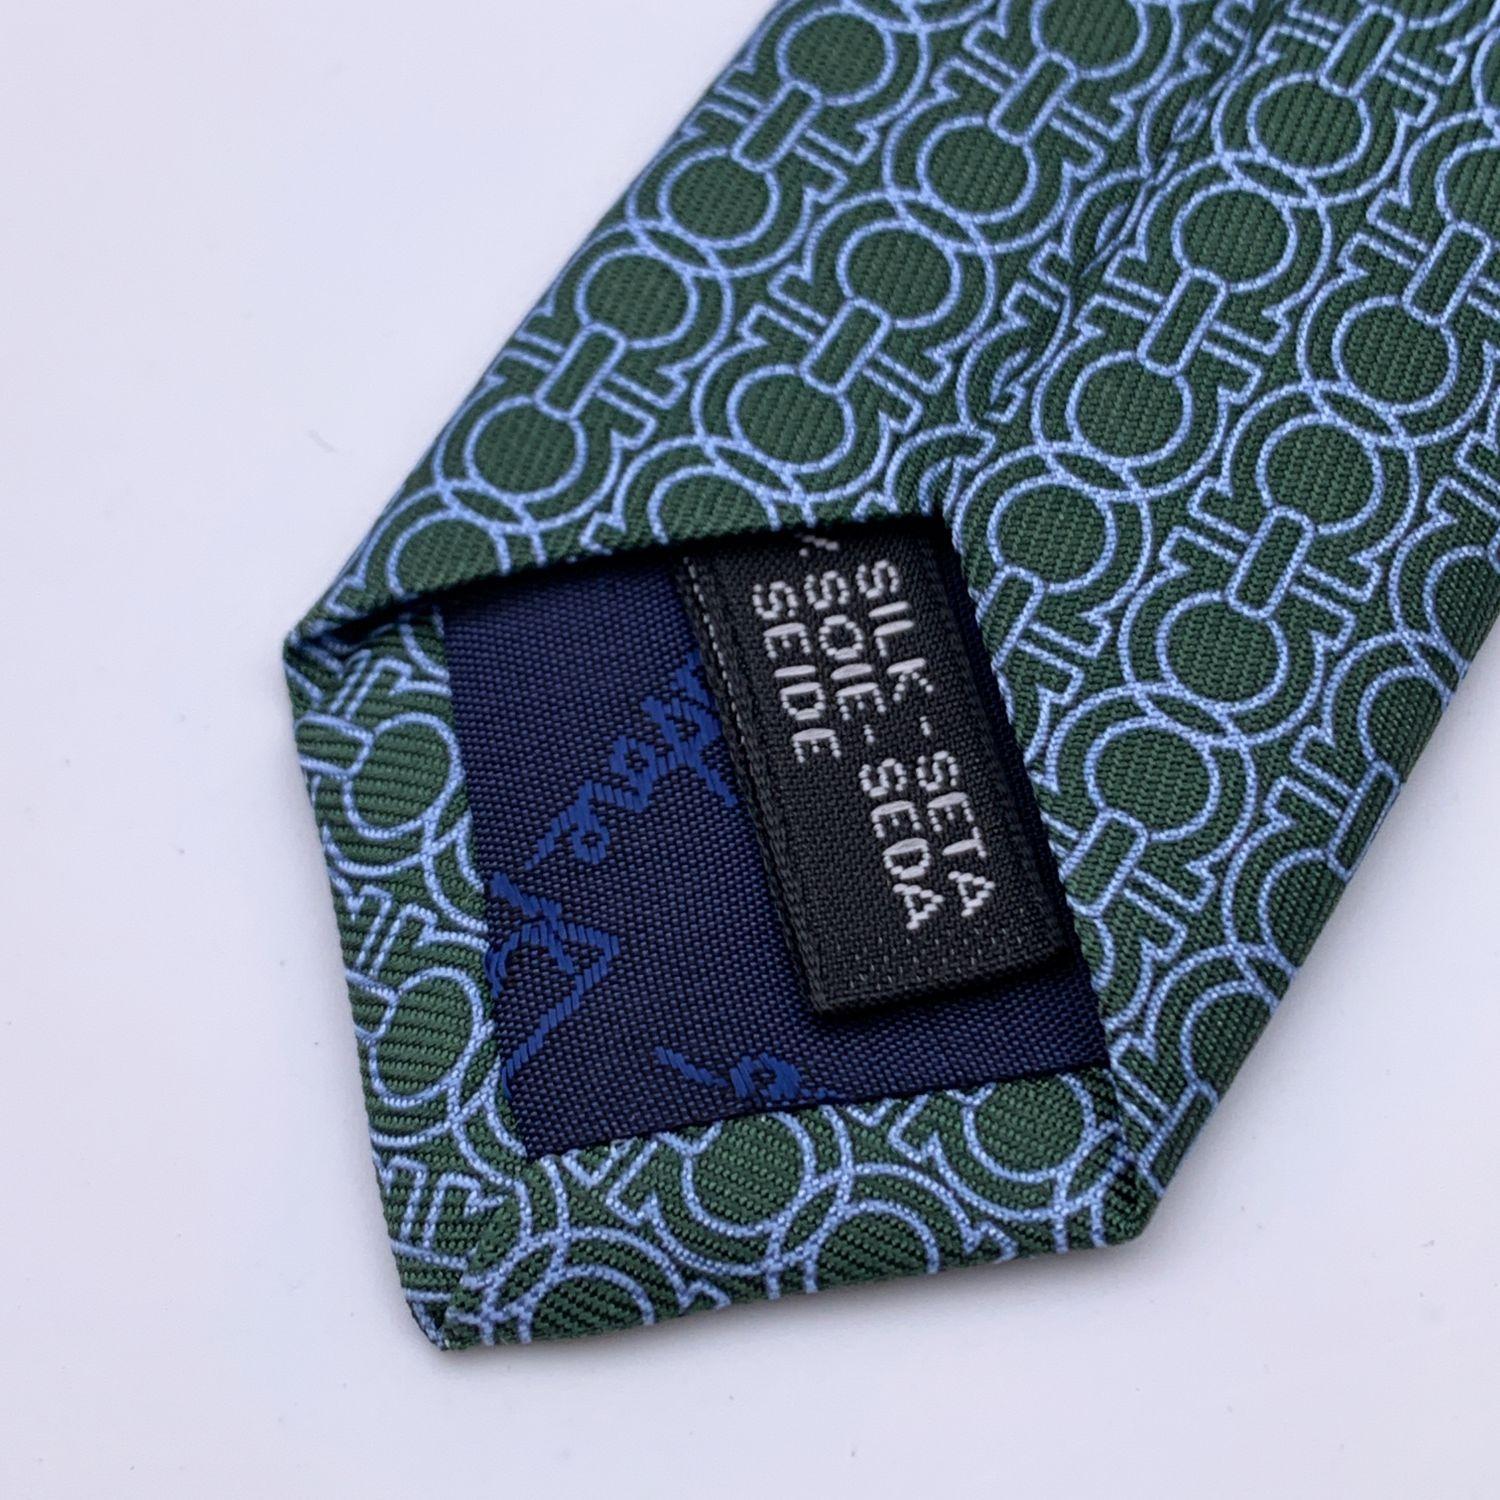 Salvatore Ferragamo 'Icona' men neck tie. Allover light blue Gancini pattern on dark green background. Composition: 100% Silk. Measurements: 60 x 3.1 inches - 152 x 8 cm. Made in Italy. Retail price was 155 Euros Details MATERIAL: Silk COLOR: Green